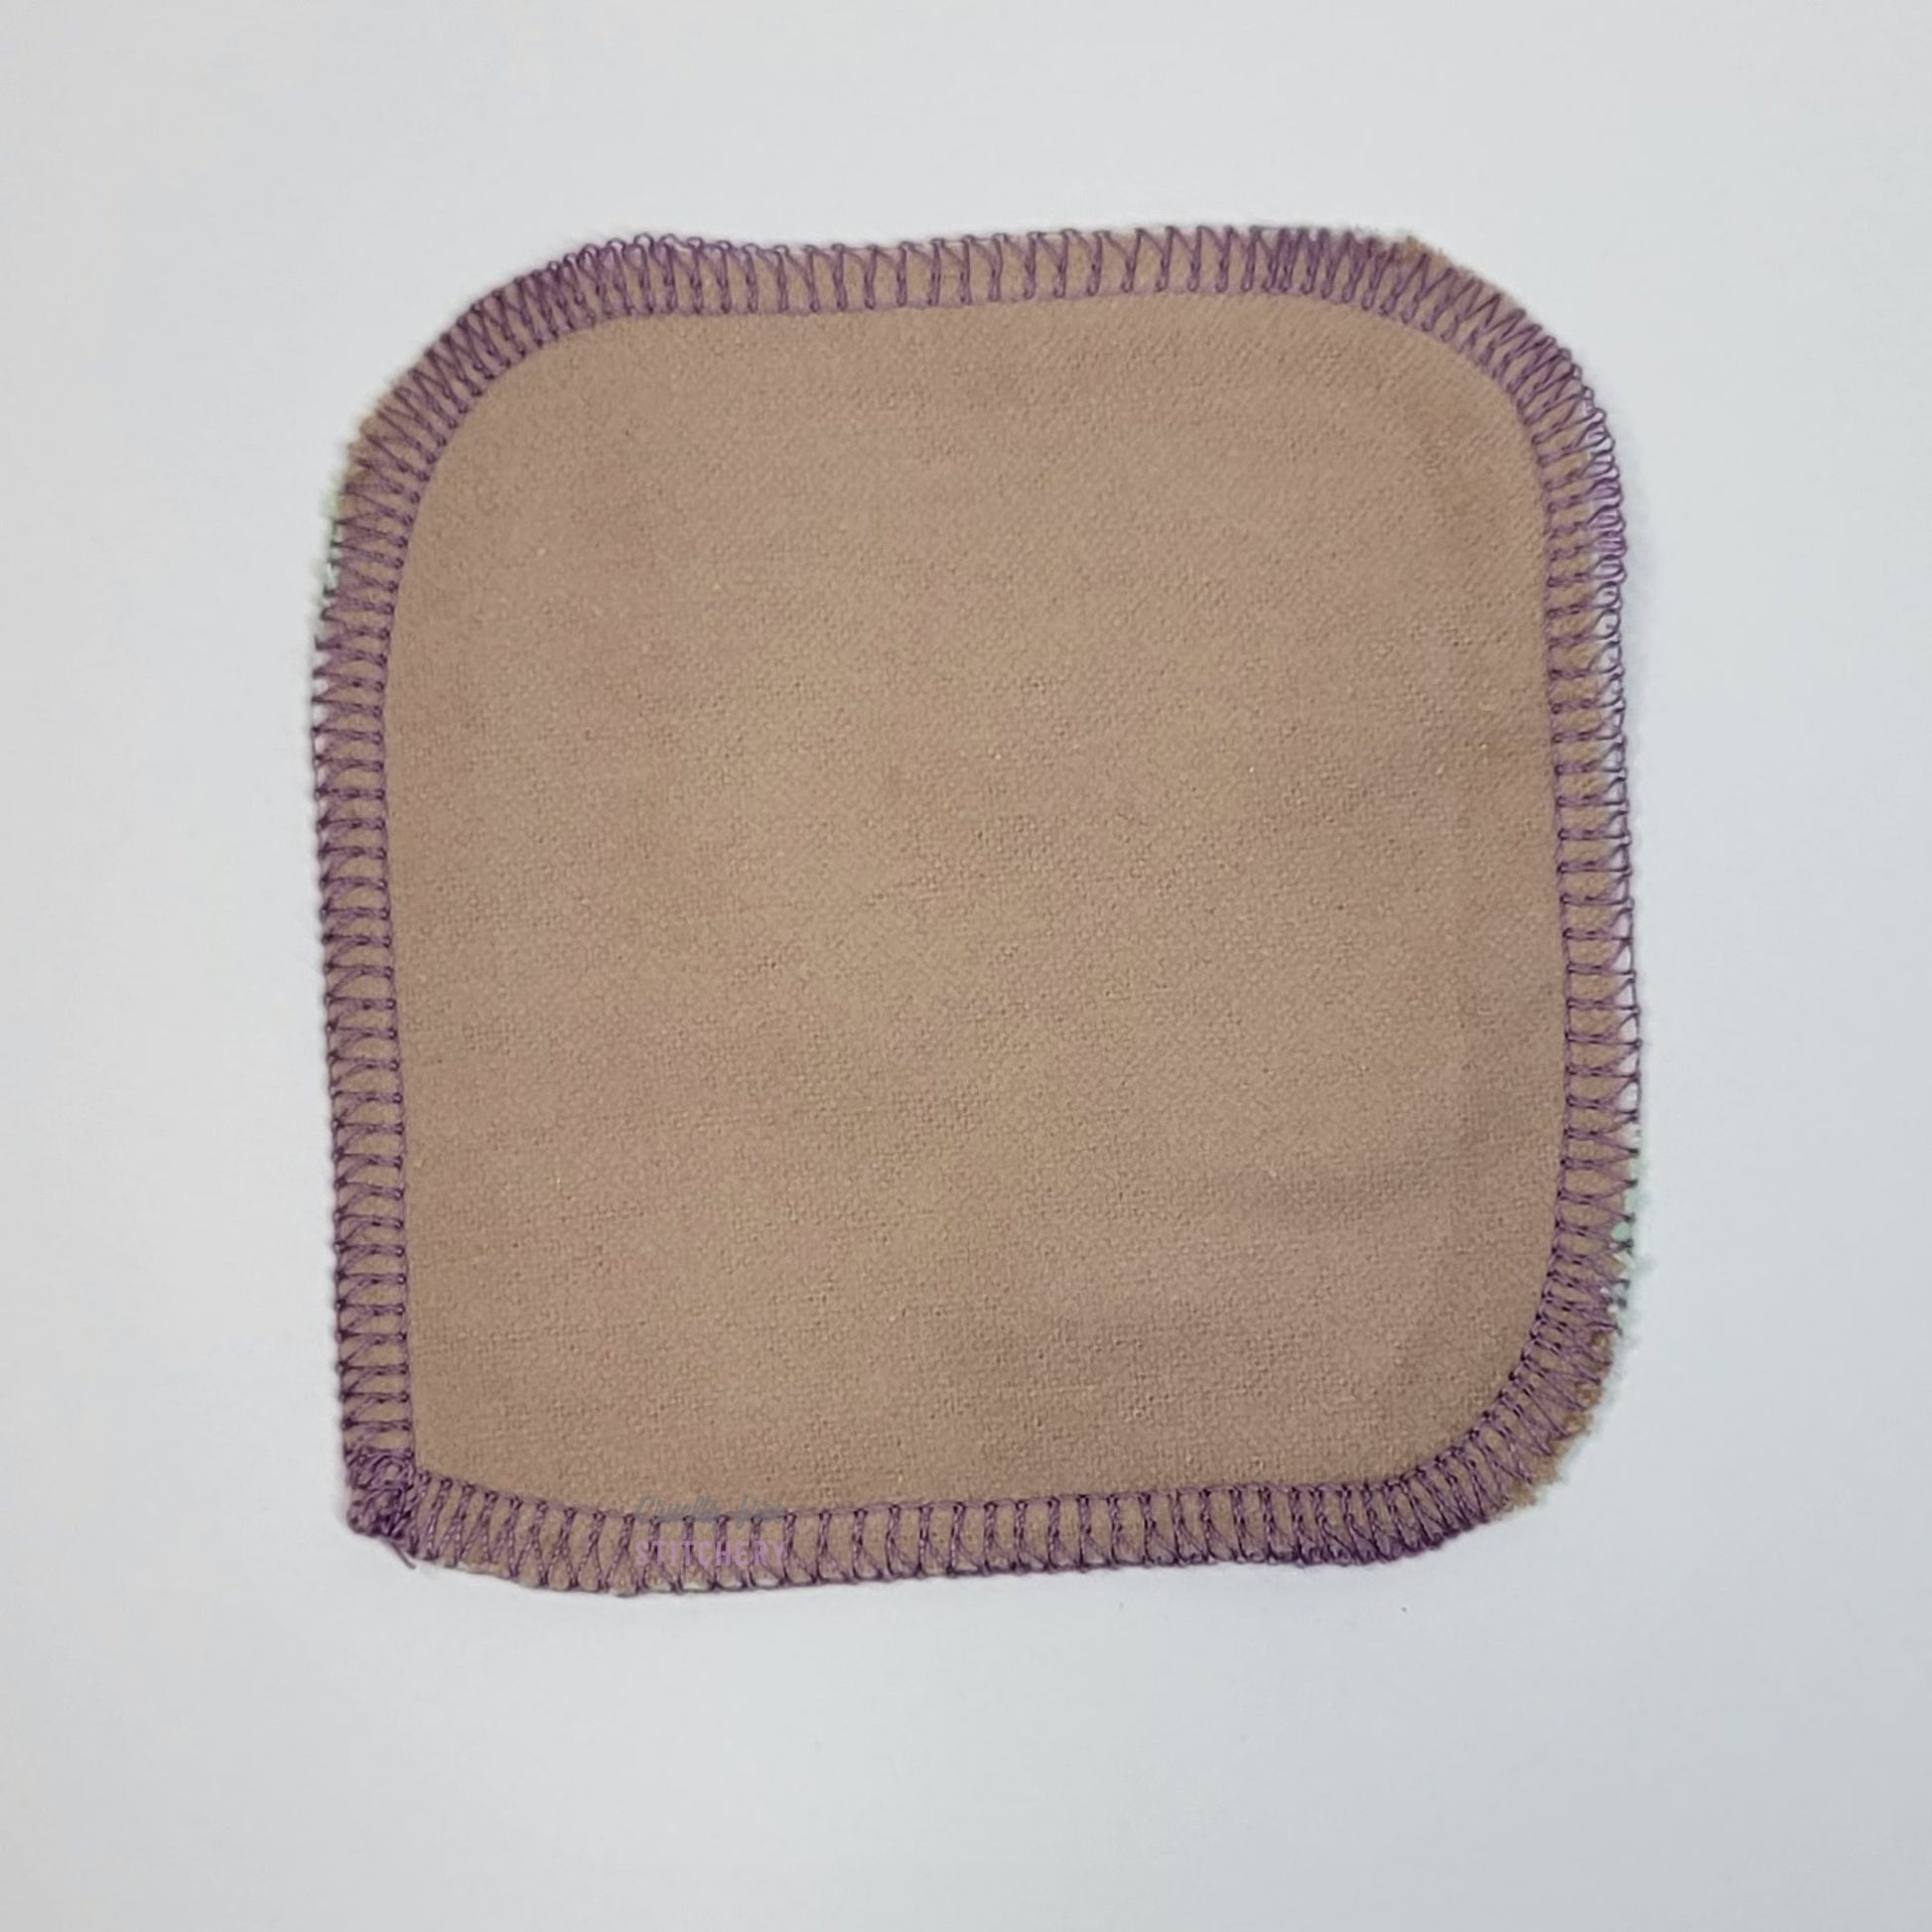 The back of a goats print reusable cotton round, it is a solid light tan color.